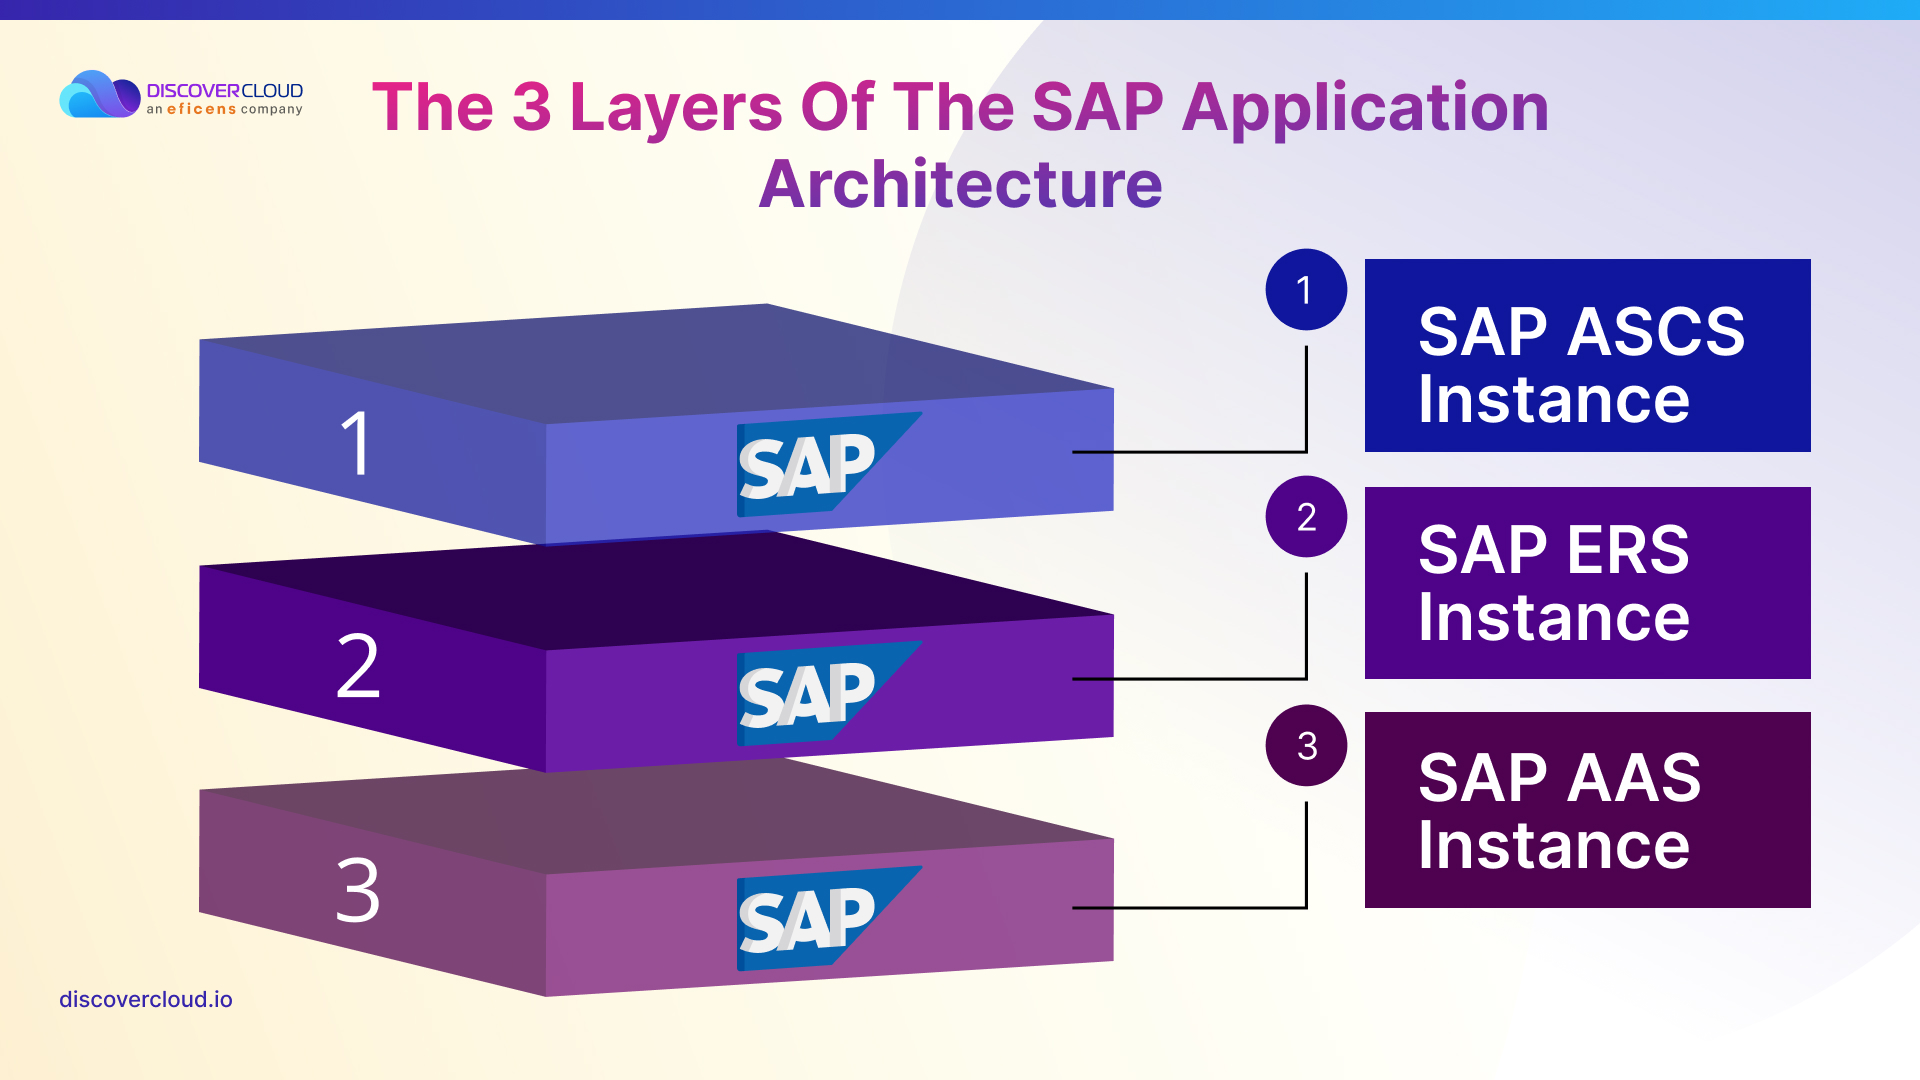 3 layers of the SAP Application Architecture